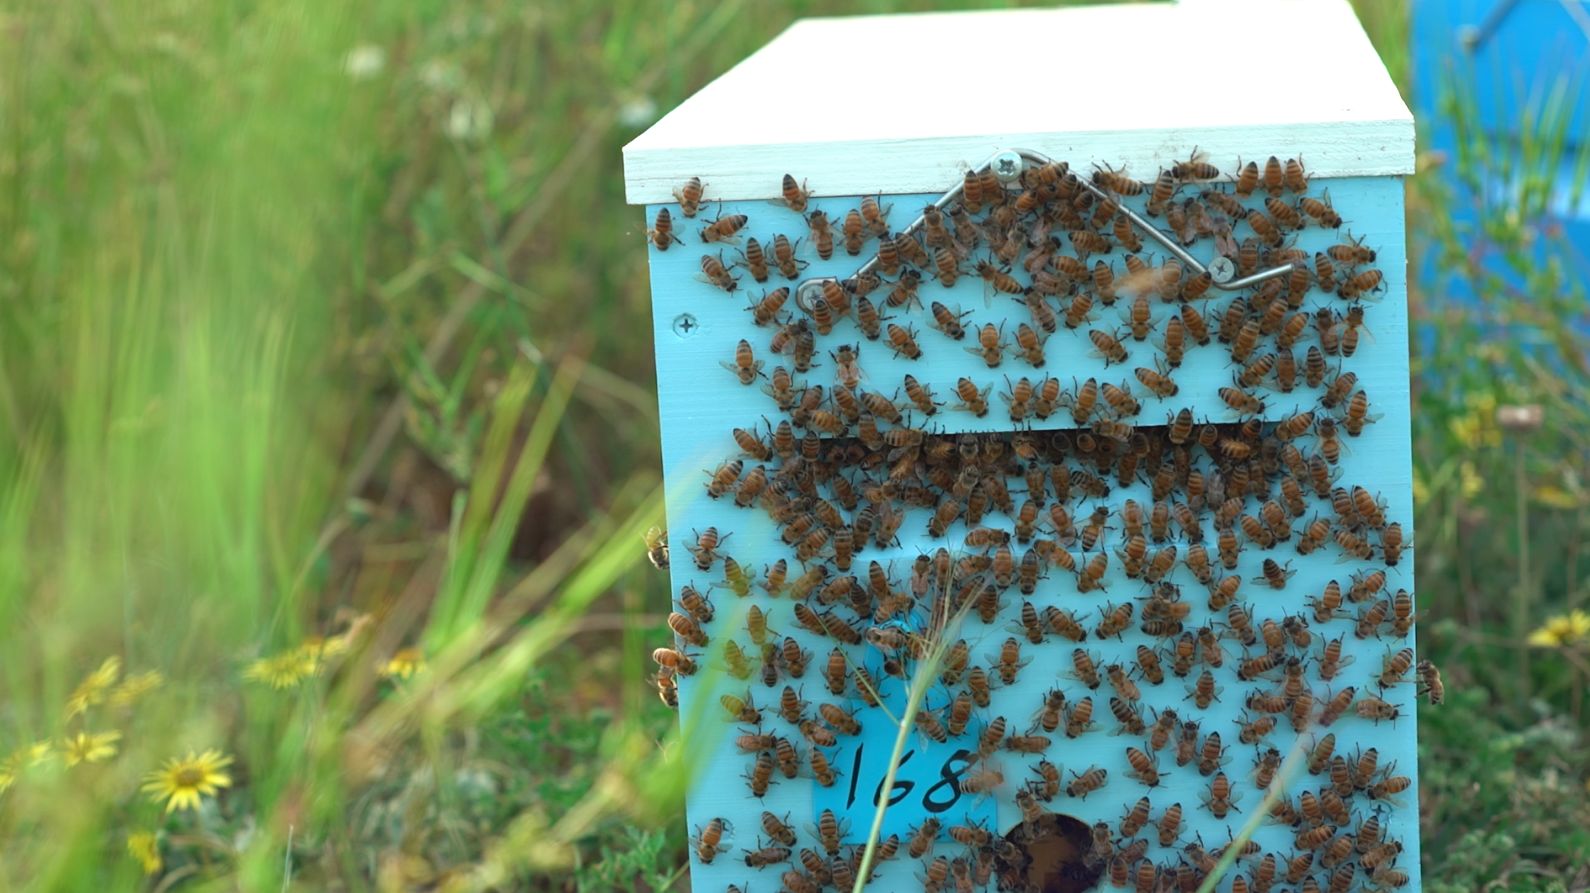 Beekeeping 101: How to Stop Hive Robbing